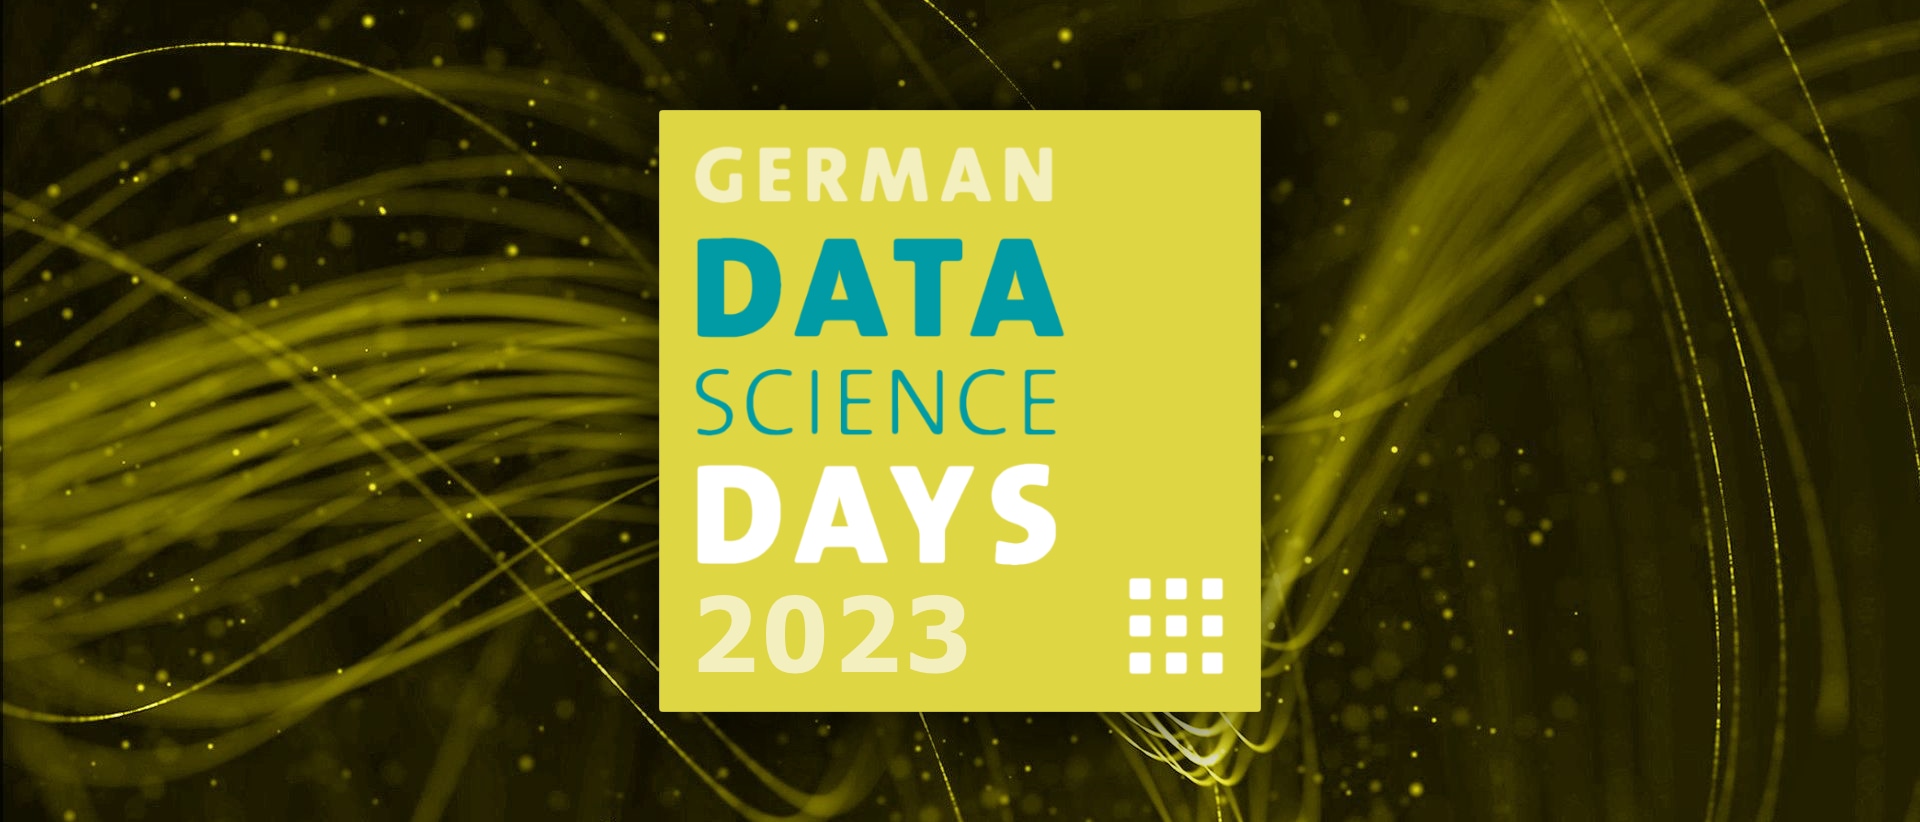 Abstract wave of data stream with German Data Science Days logo